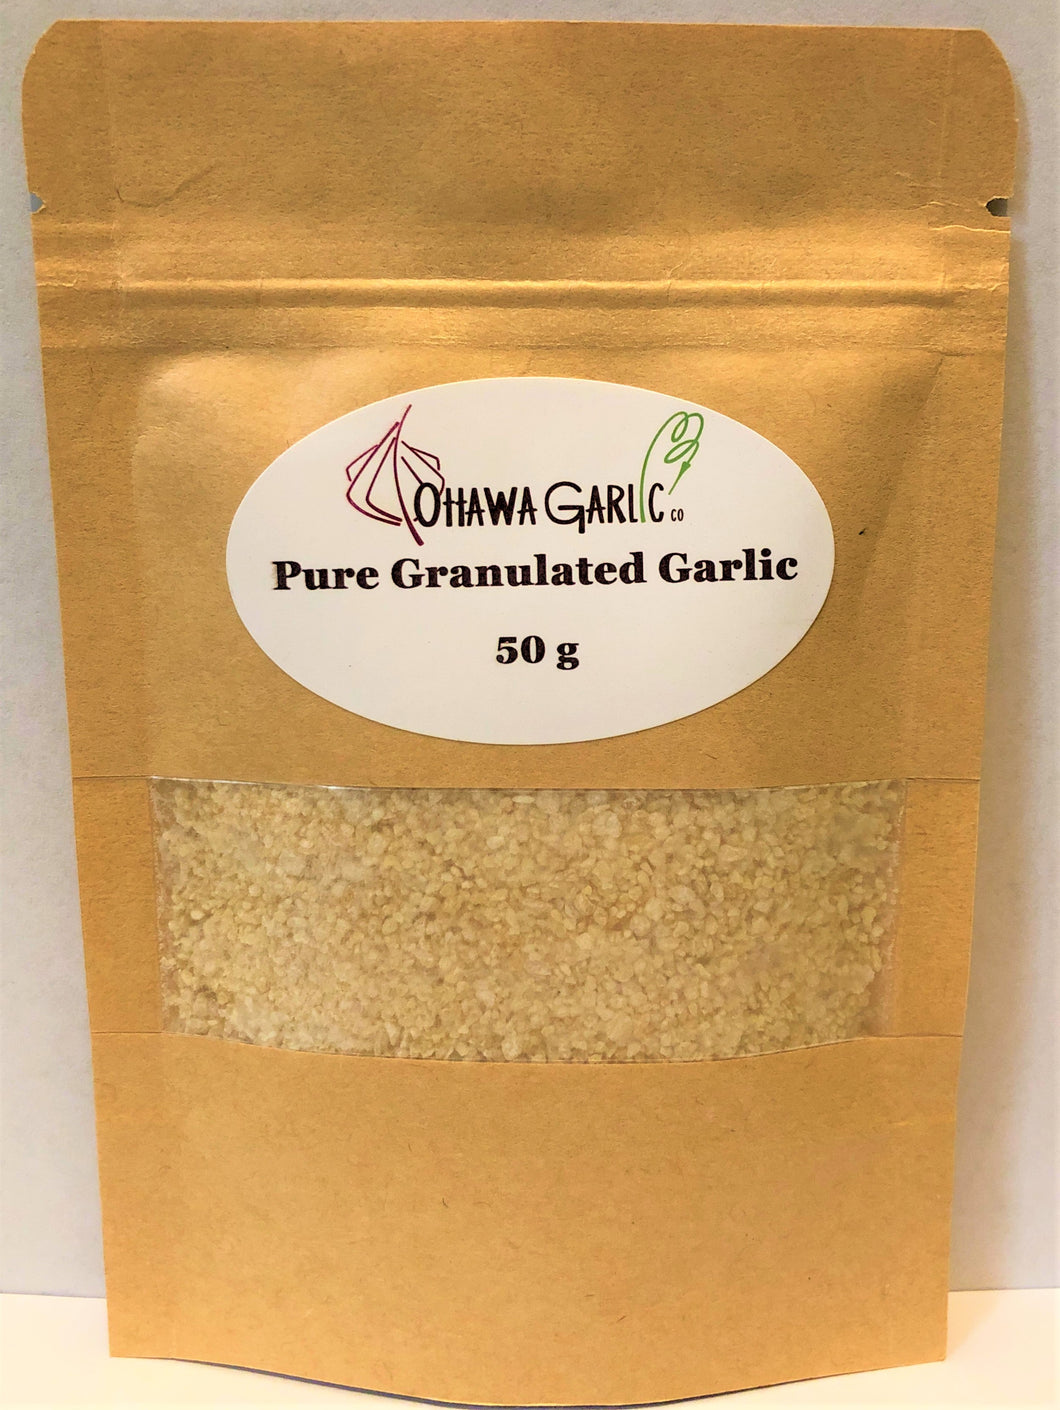 Pure Granulated Garlic - 50g Pouch